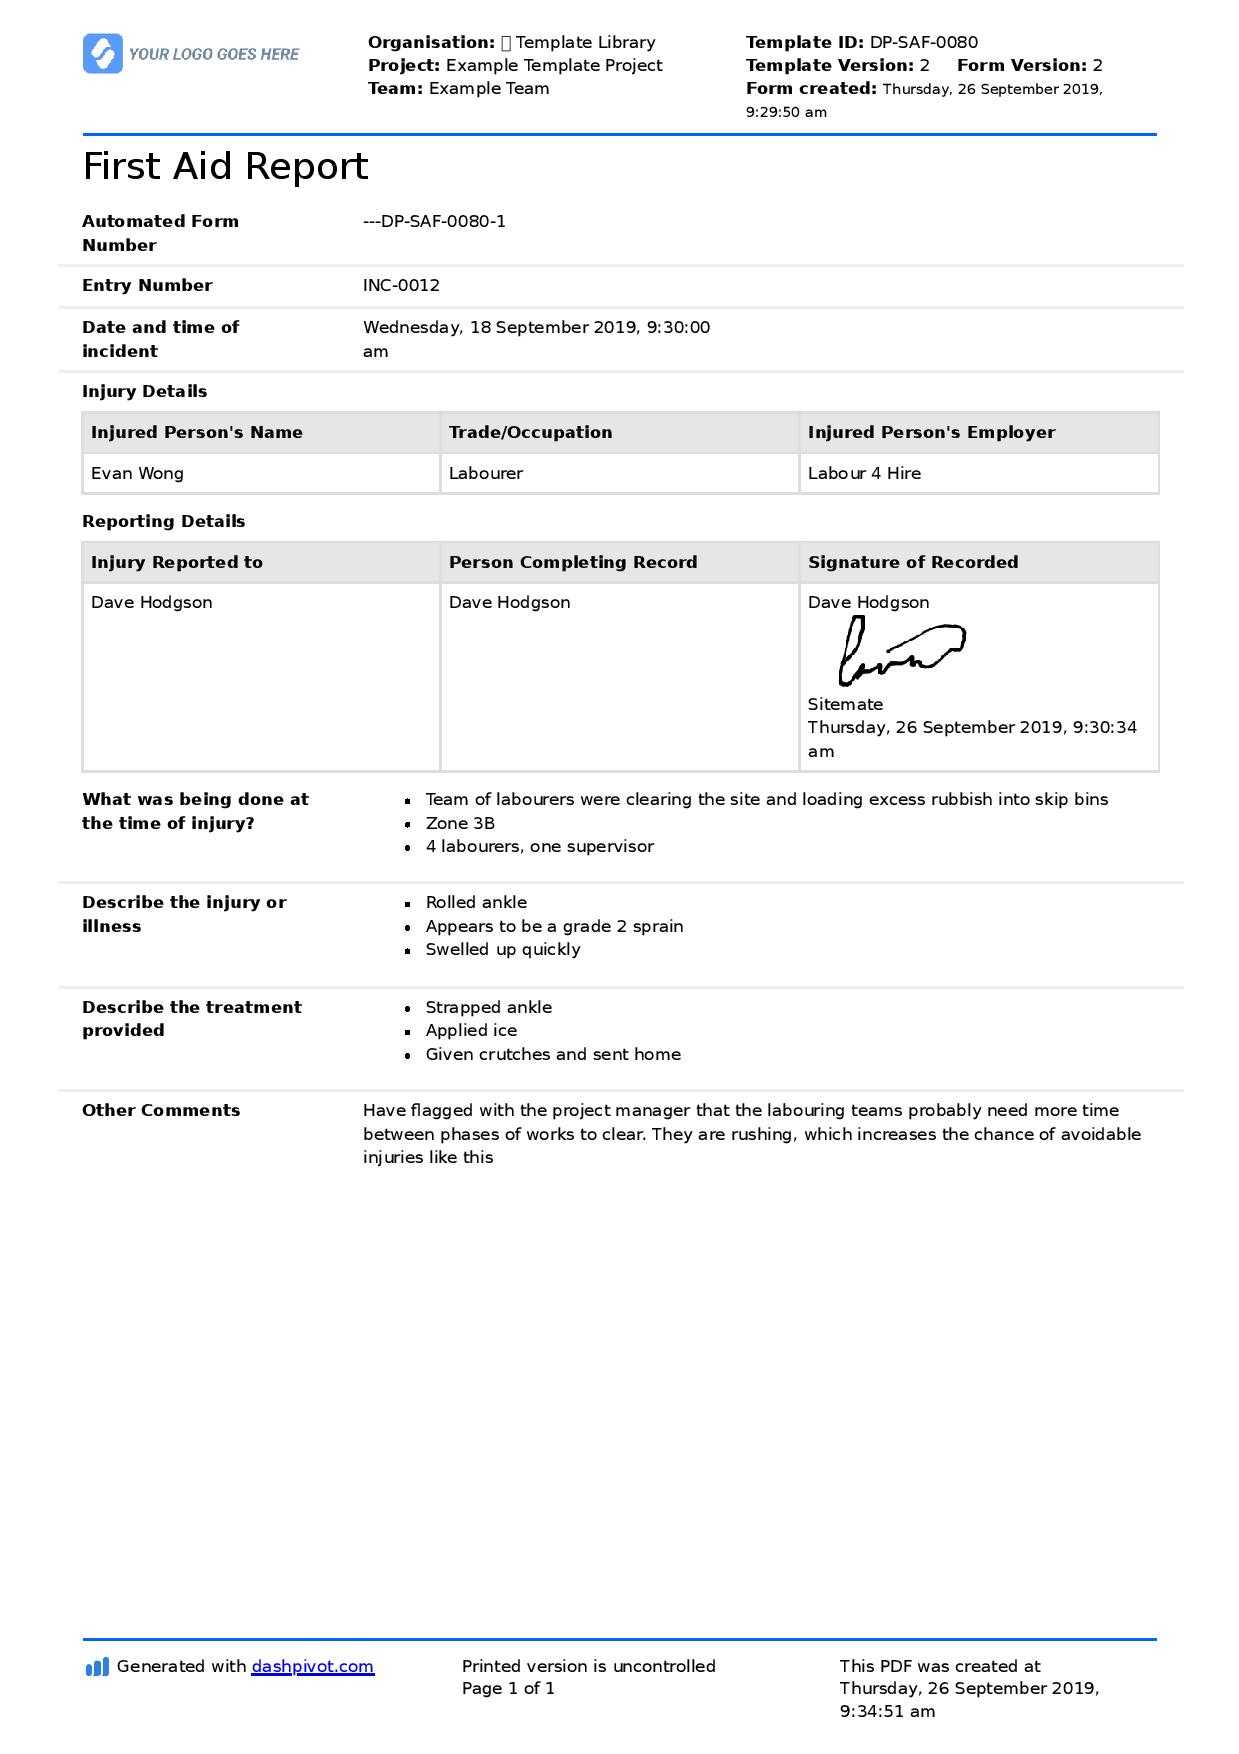 First Aid Report Form Template (Free To Use, Better Than Pdf) Regarding First Aid Incident Report Form Template